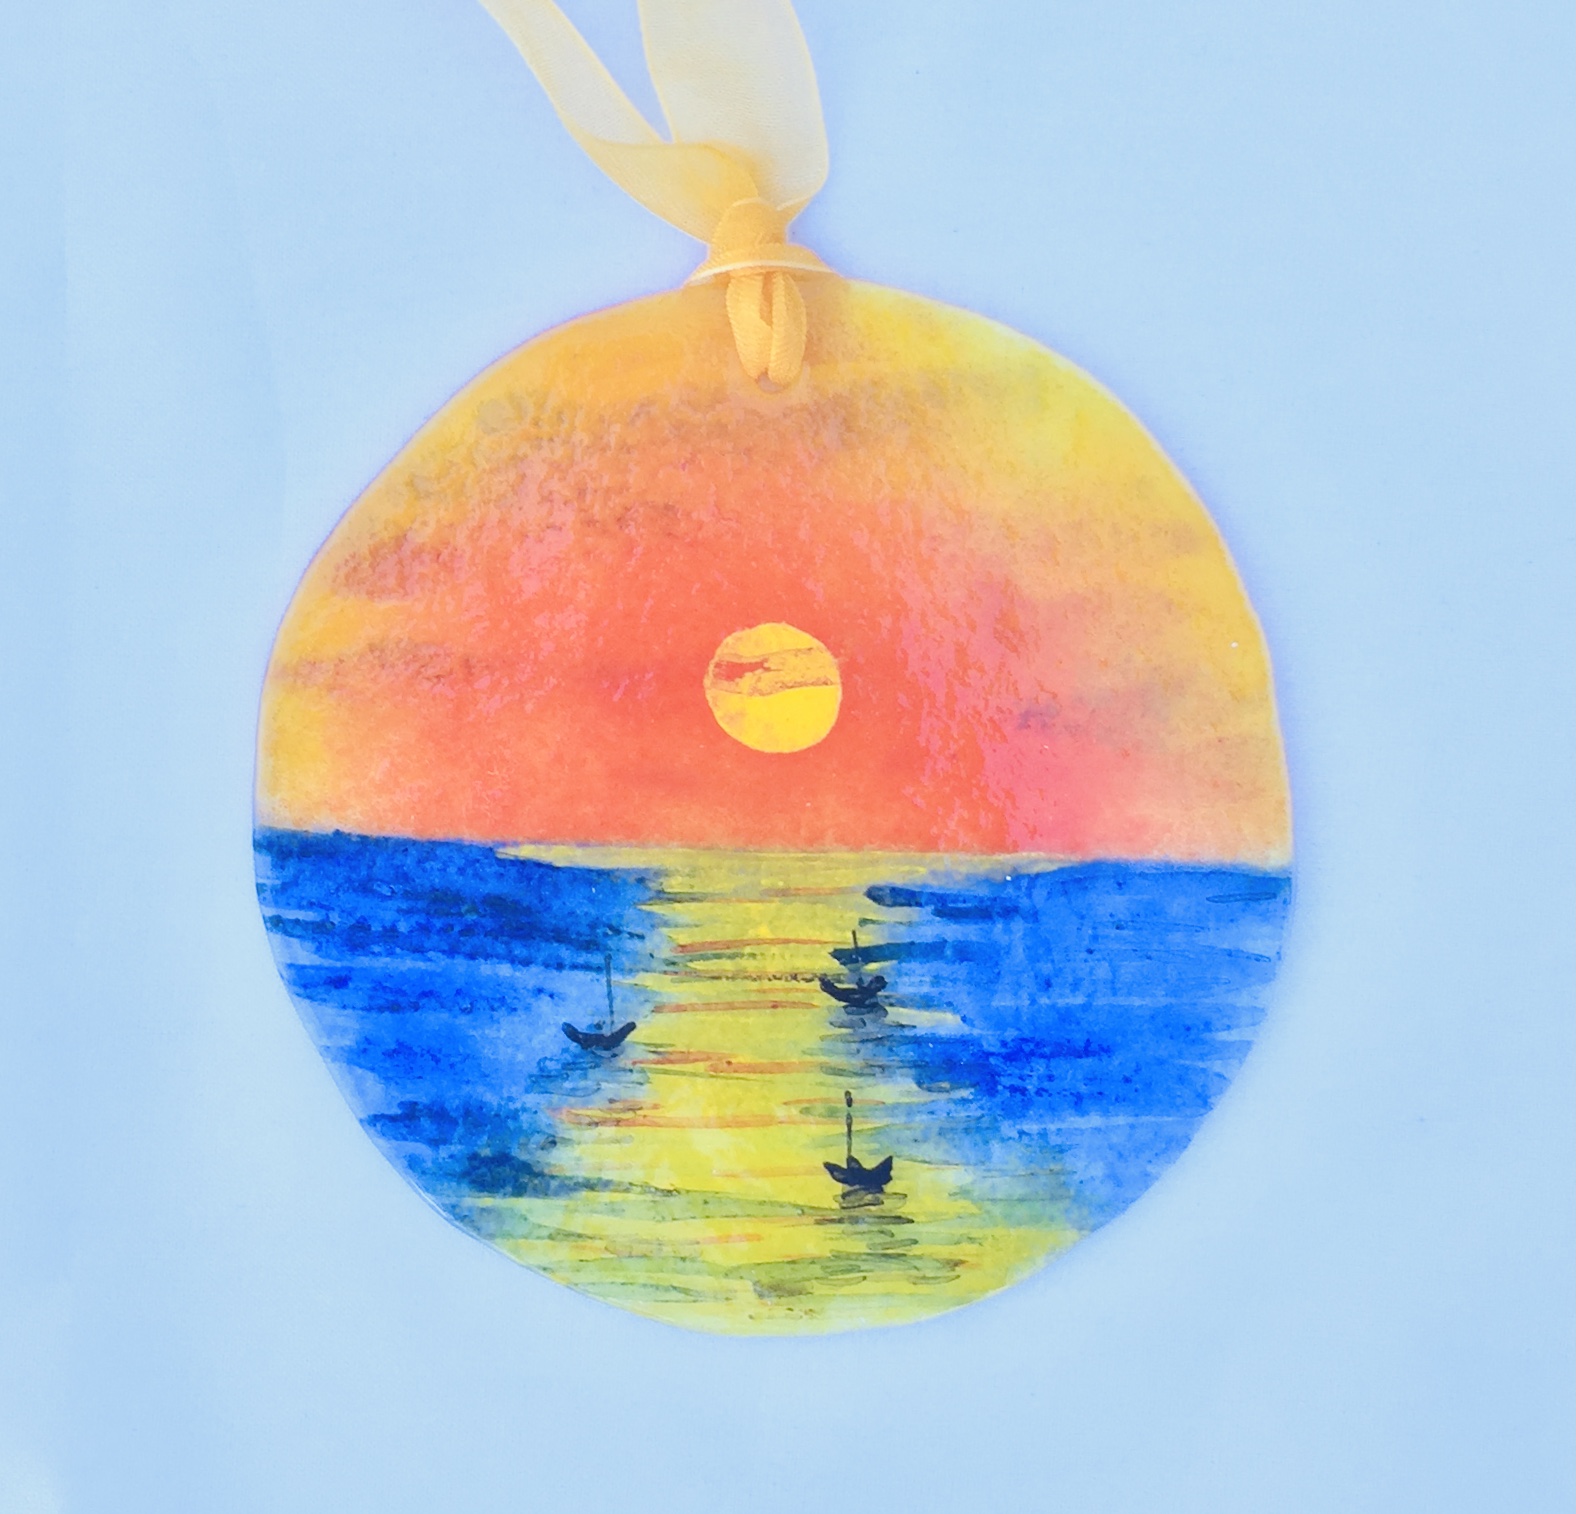 Sunset at sea suncatcher with hand-painted boats, orange sky and clear blue ocean